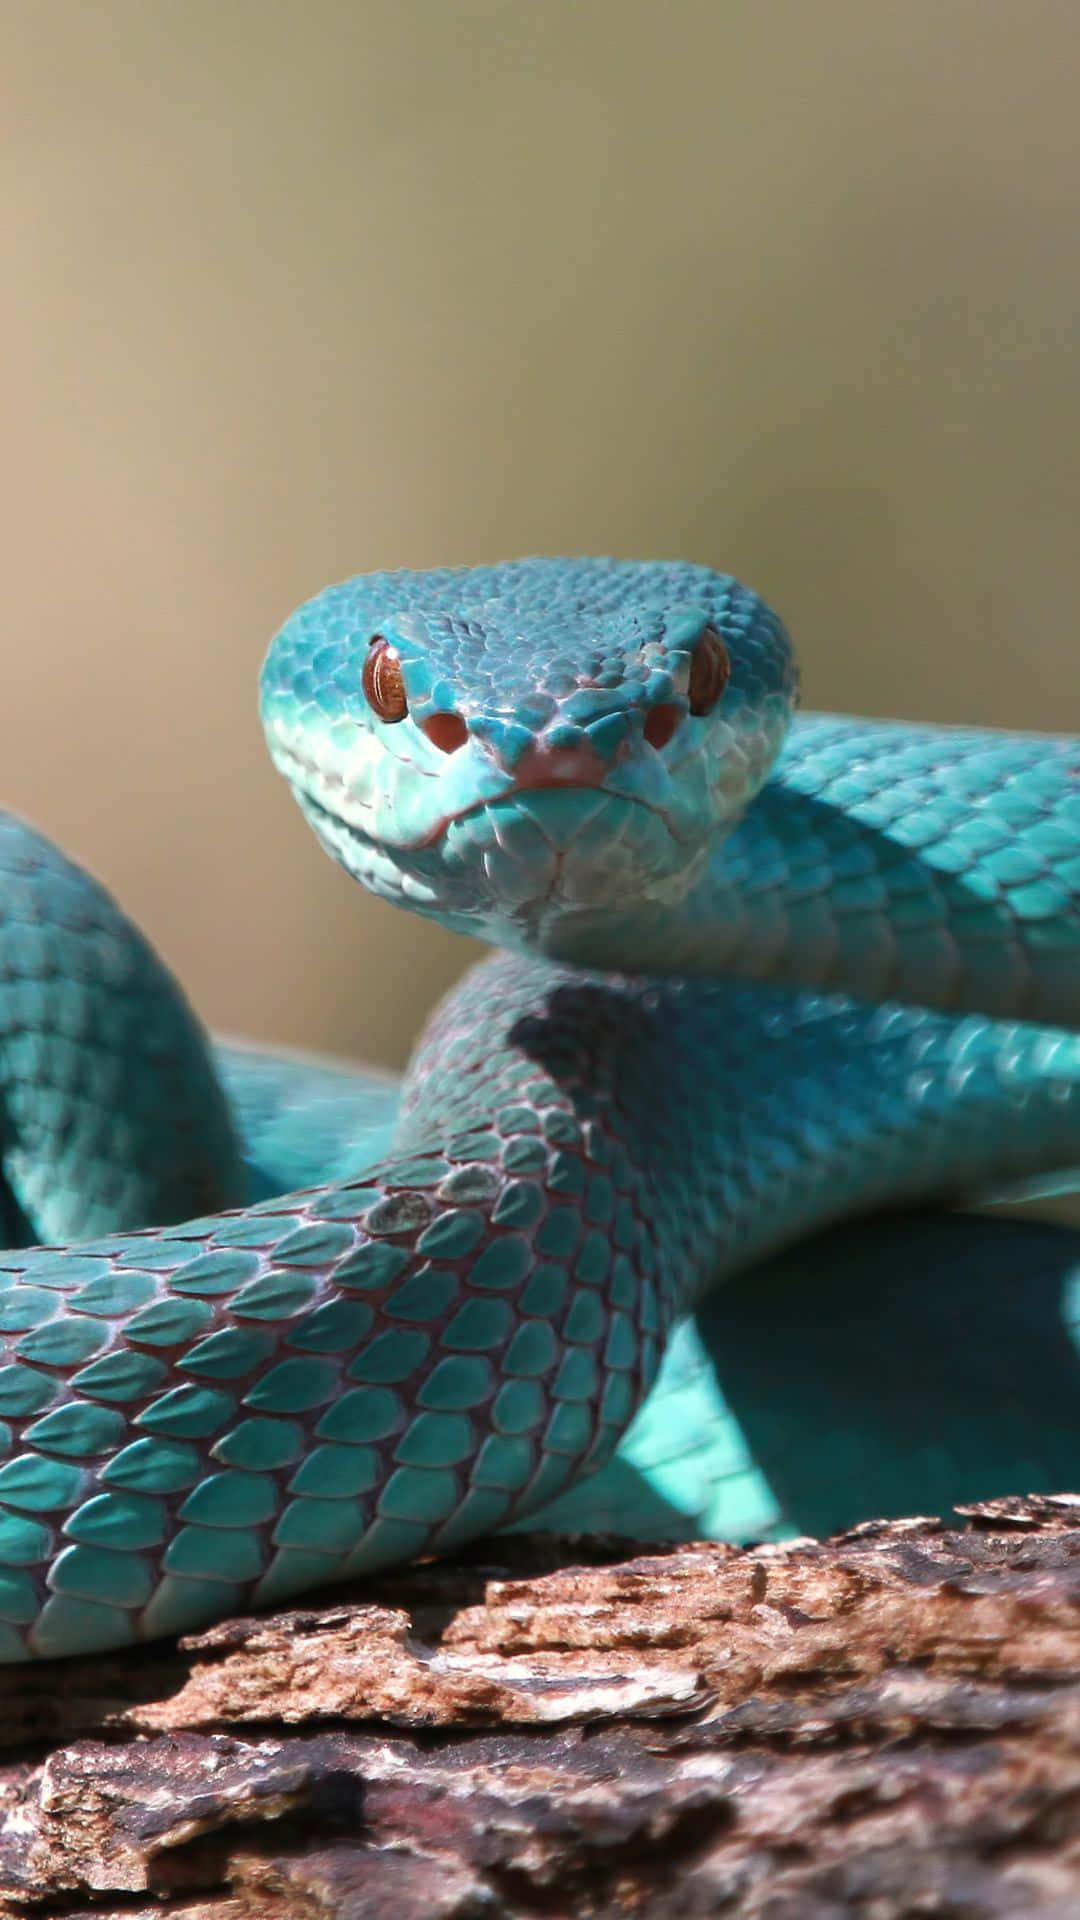 Cool Snake With Teal Skin Wallpaper